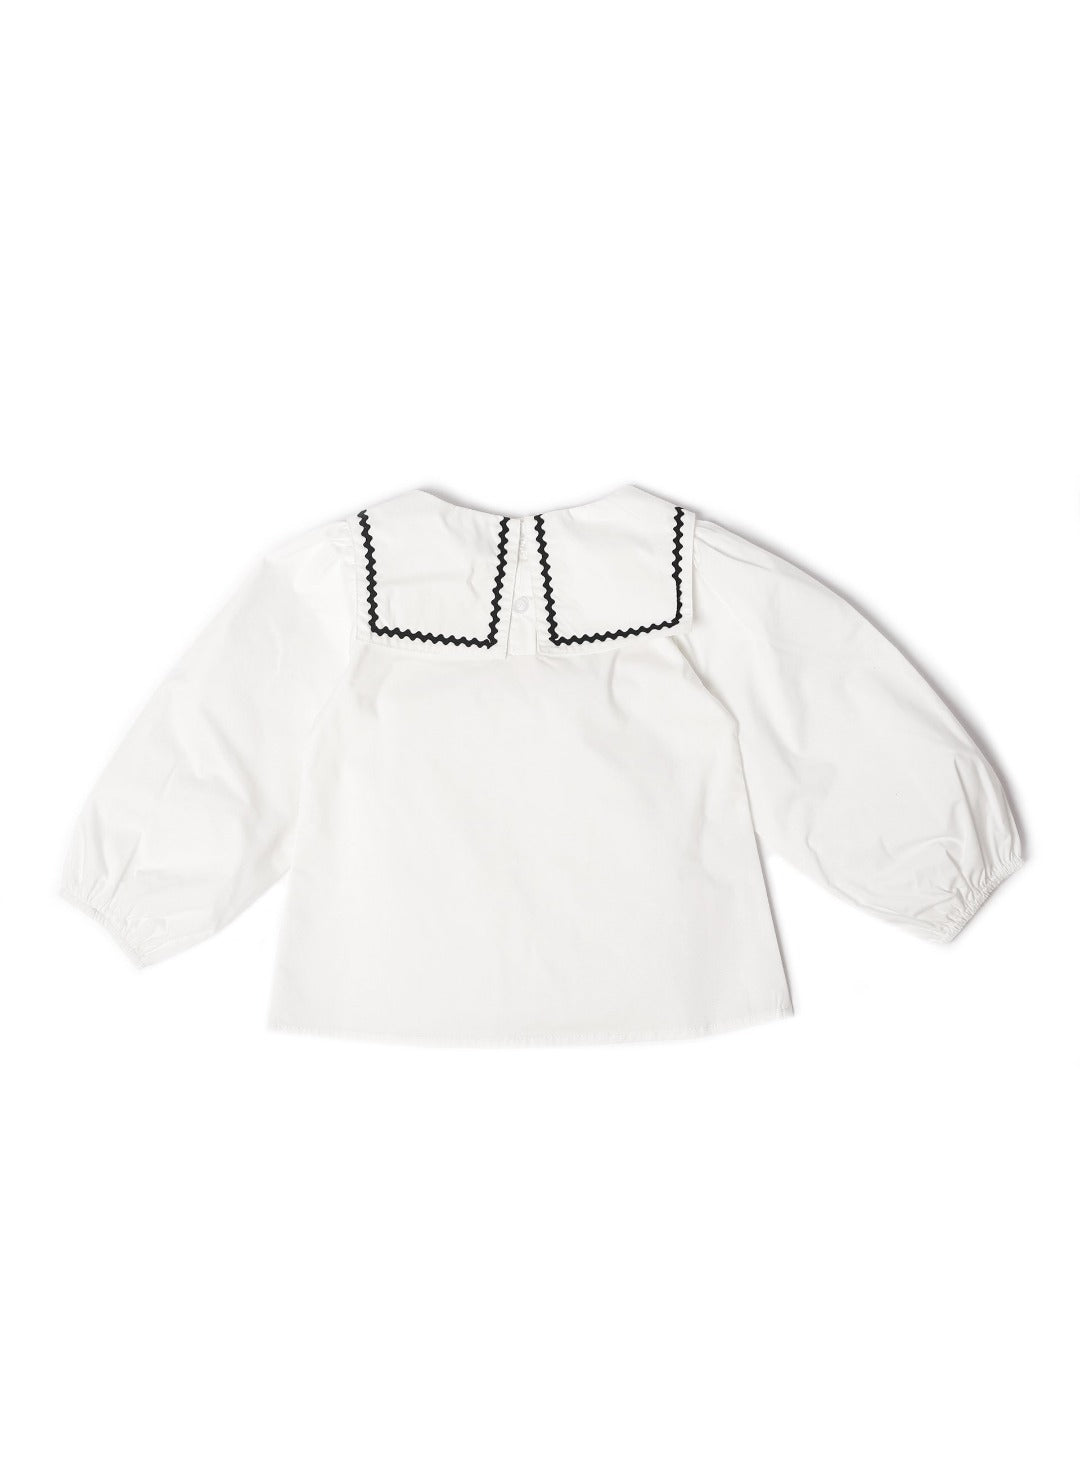 white long sleeve top with square collar